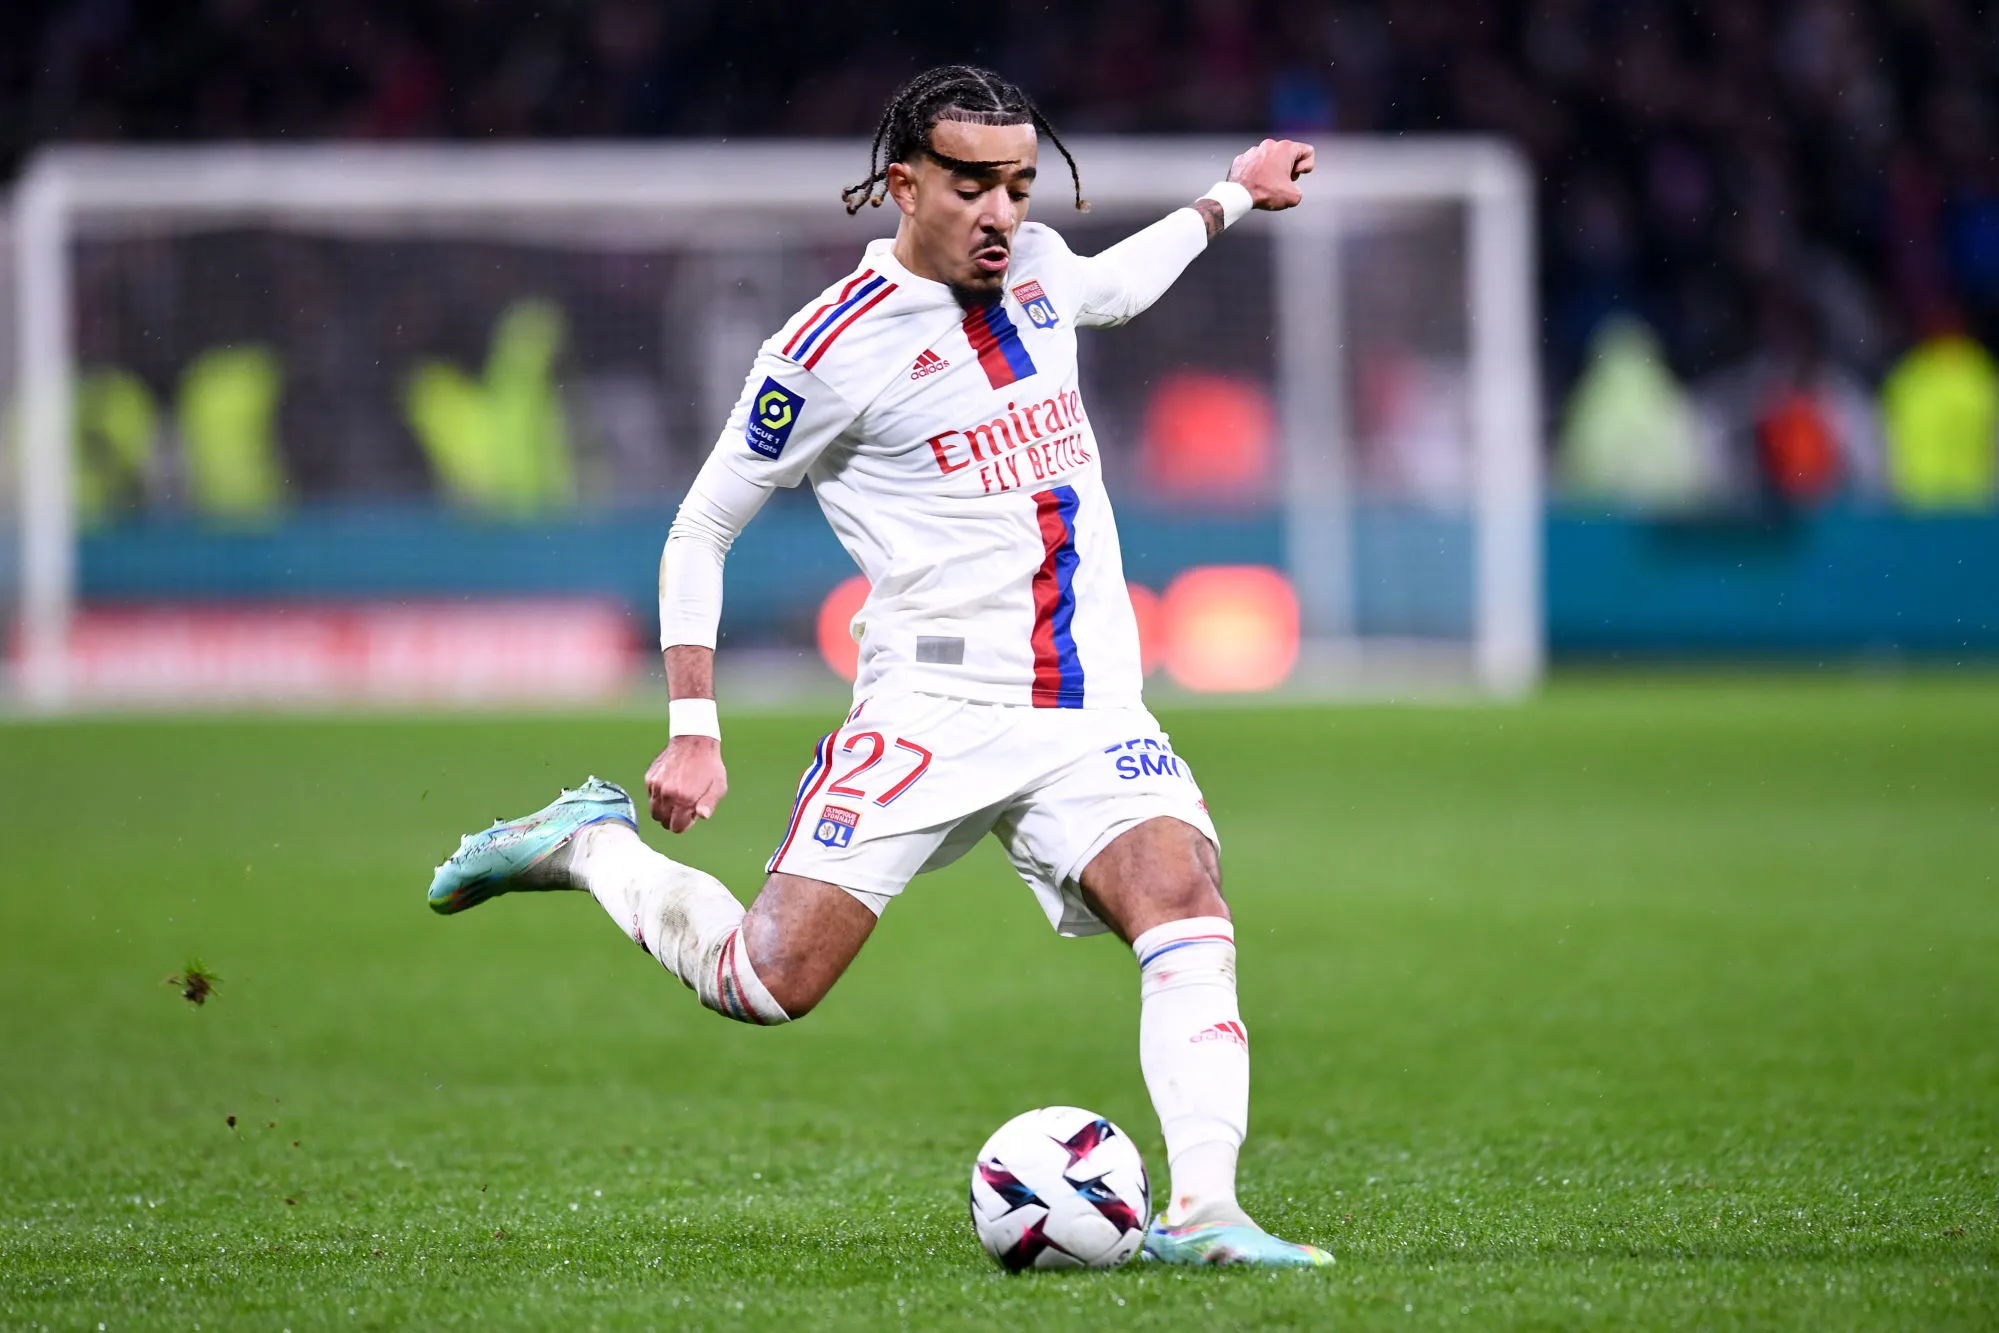 27 Malo GUSTO (ol) during the Ligue 1 Uber Eats match between Olympique Lyonnais and Racing Club de Strasbourg at Groupama Stadium on January 14, 2023 in Lyon, France. (Photo by Philippe Lecoeur/FEP/Icon Sport)